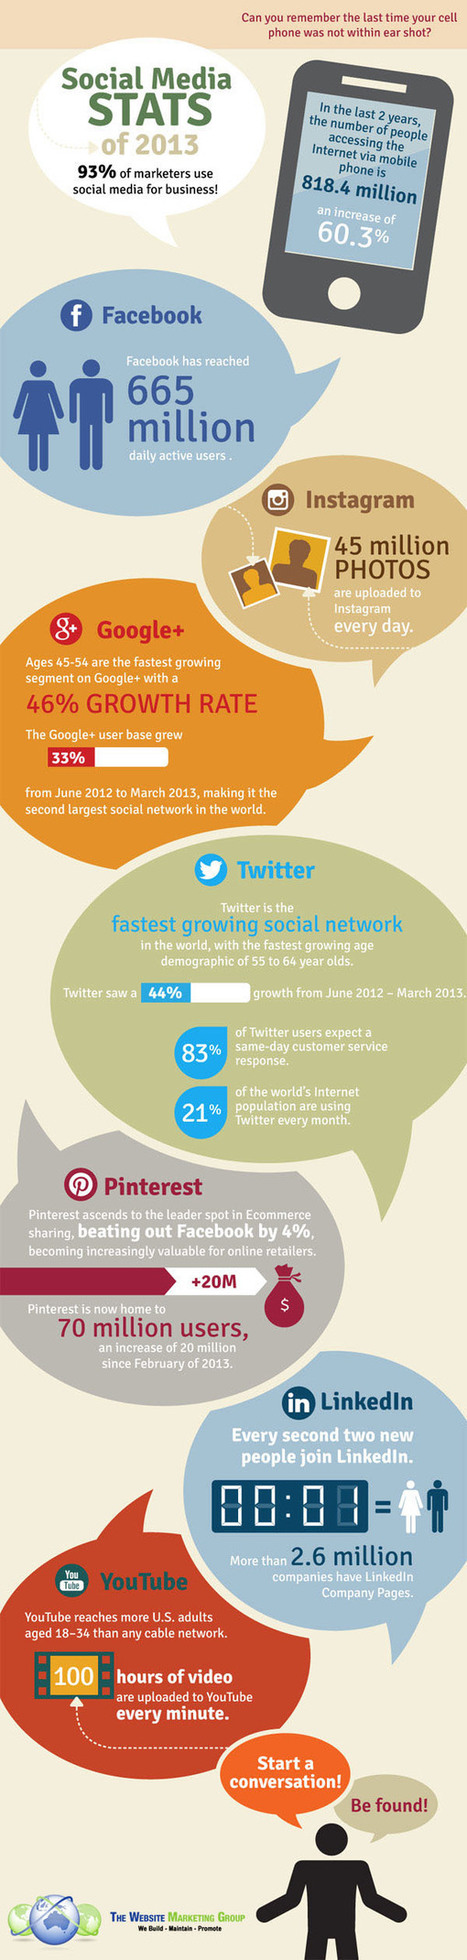 Social Media Infographic 2013 : Which platform is growing the fastest? | Education & Numérique | Scoop.it